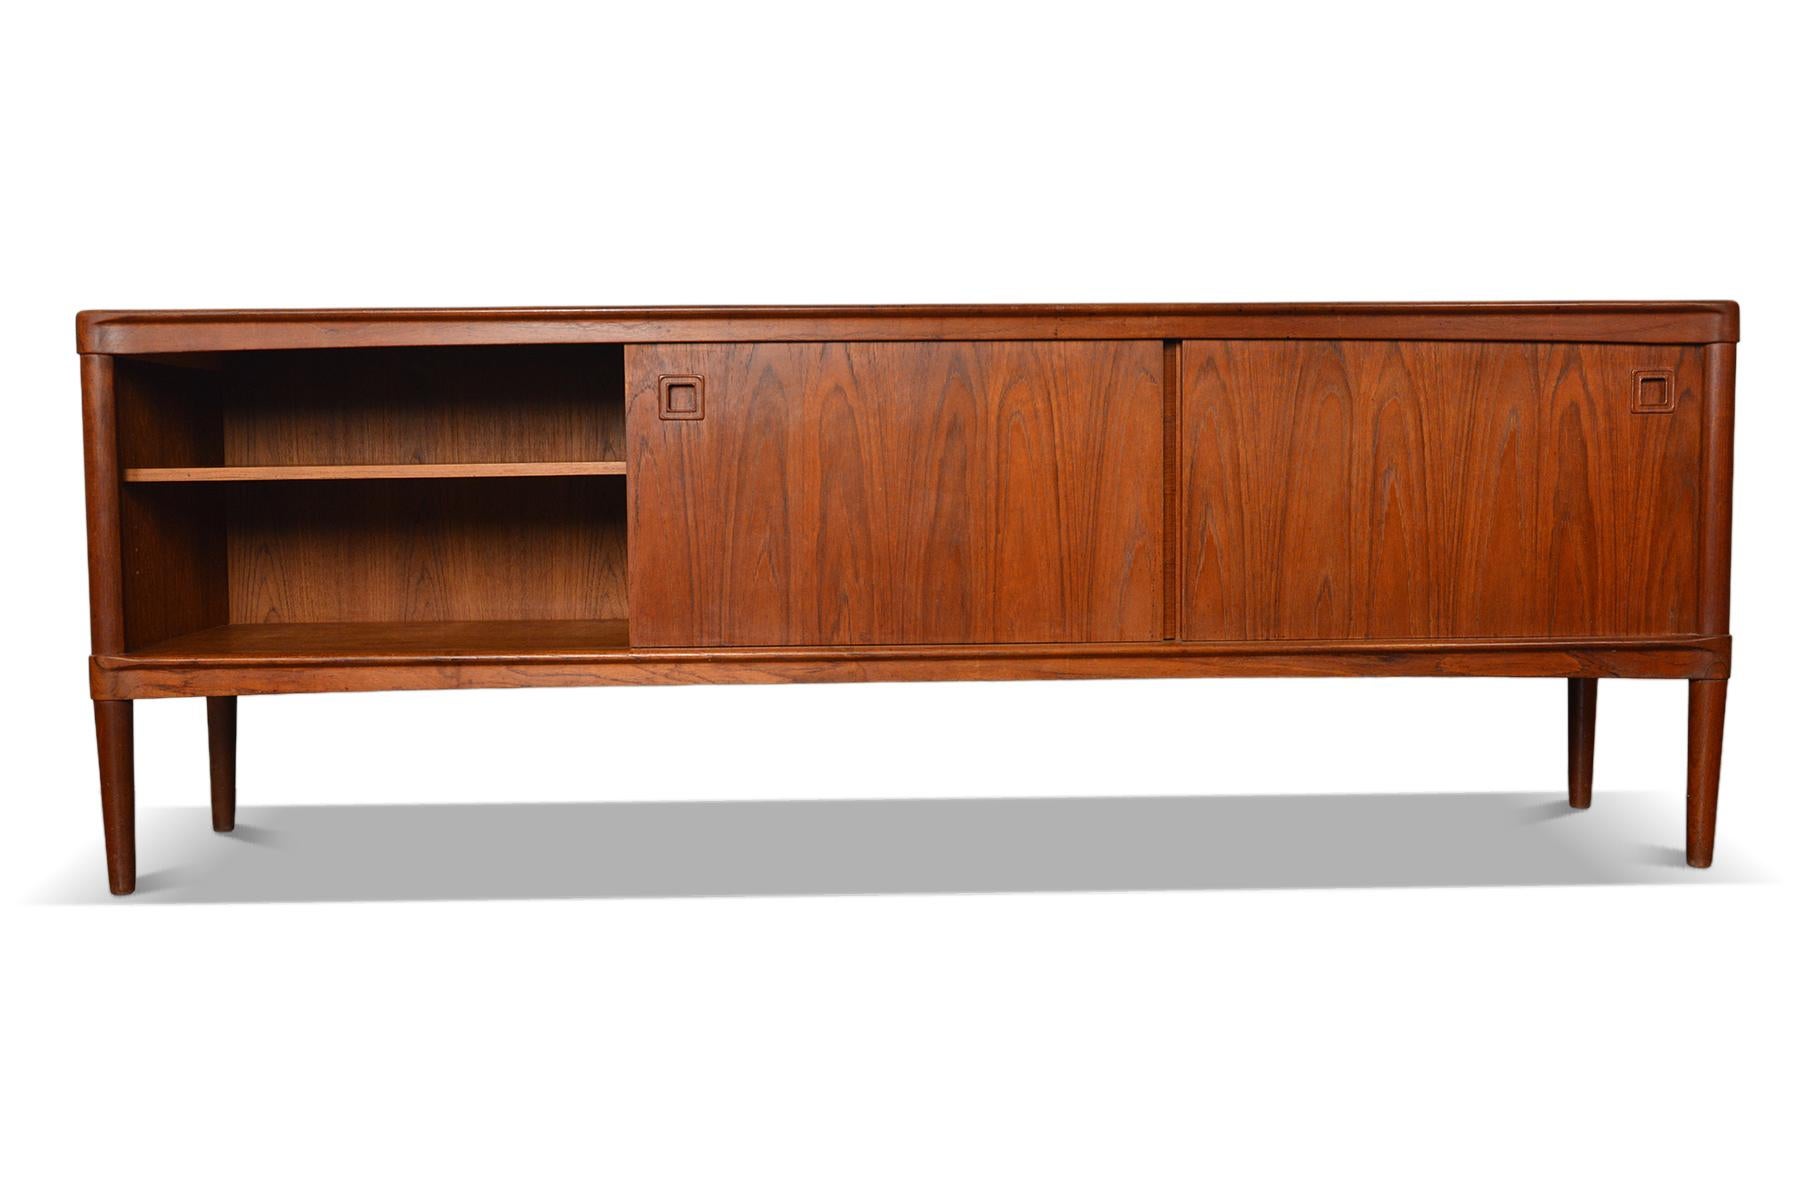 Square Pull Teak Credenza by h.w. Klein #1 For Sale 2